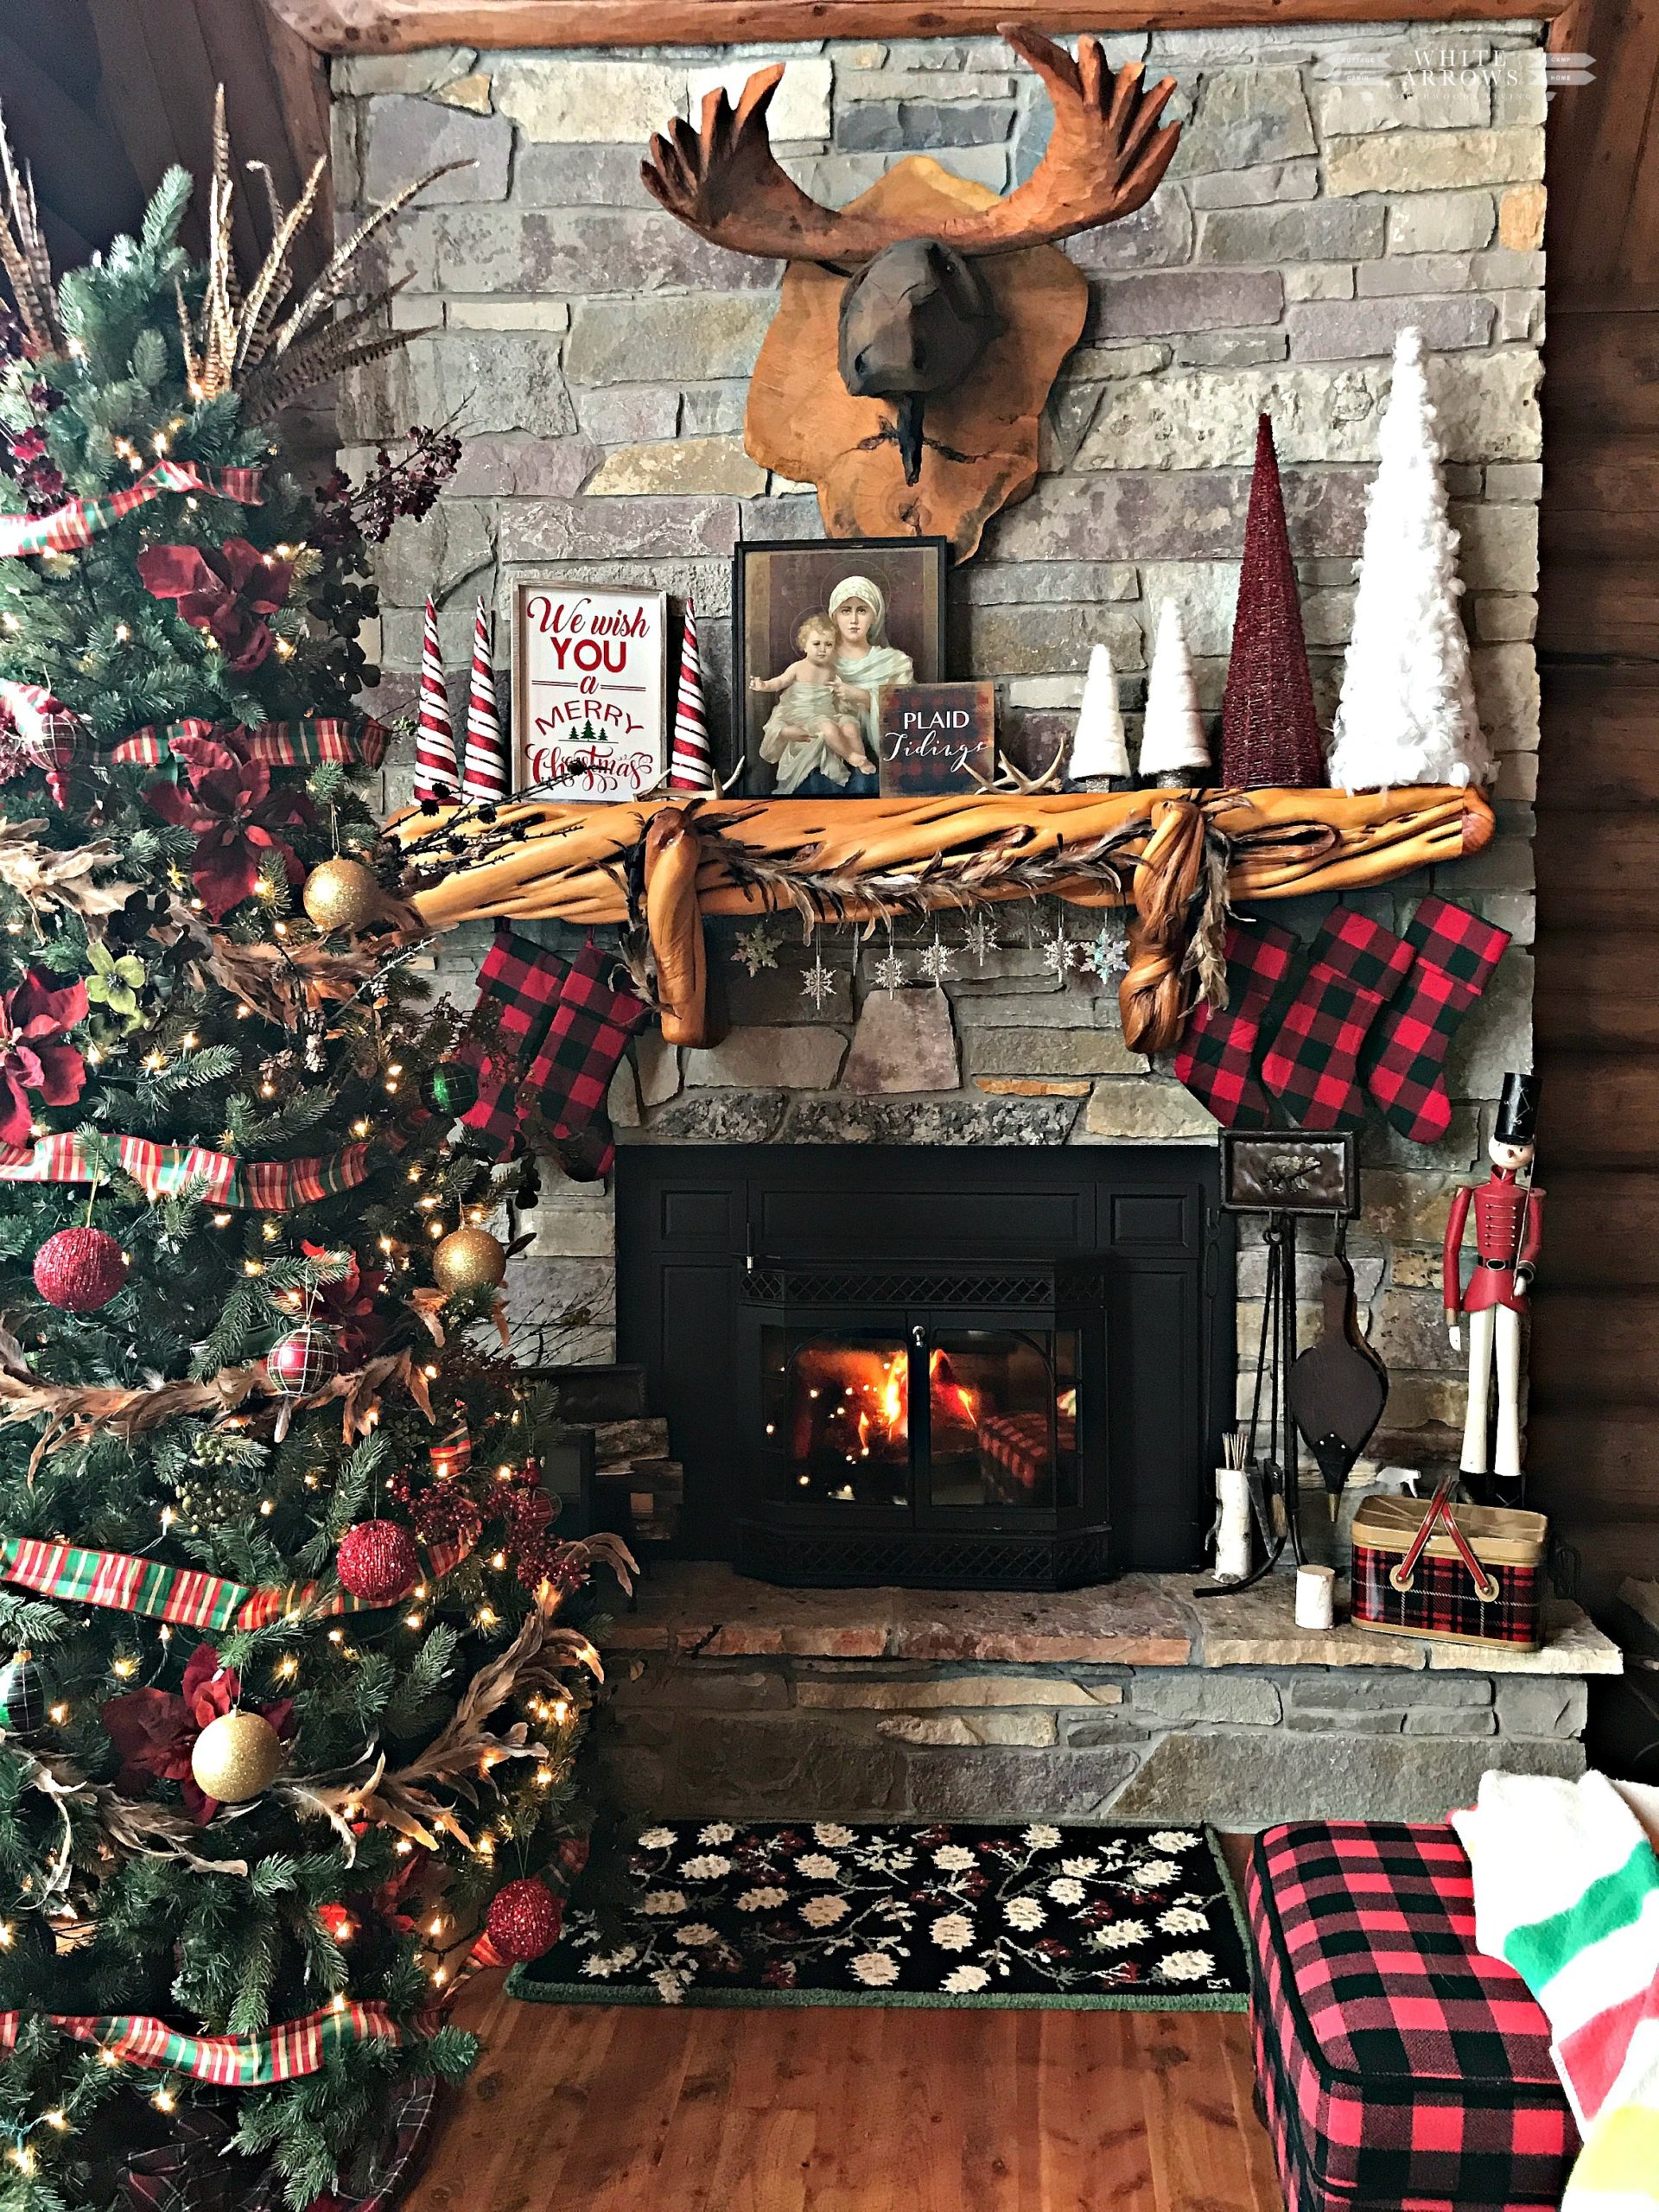 rustic Christmas decorations - Wrap in Warmth: Plaid and Flannel Coziness